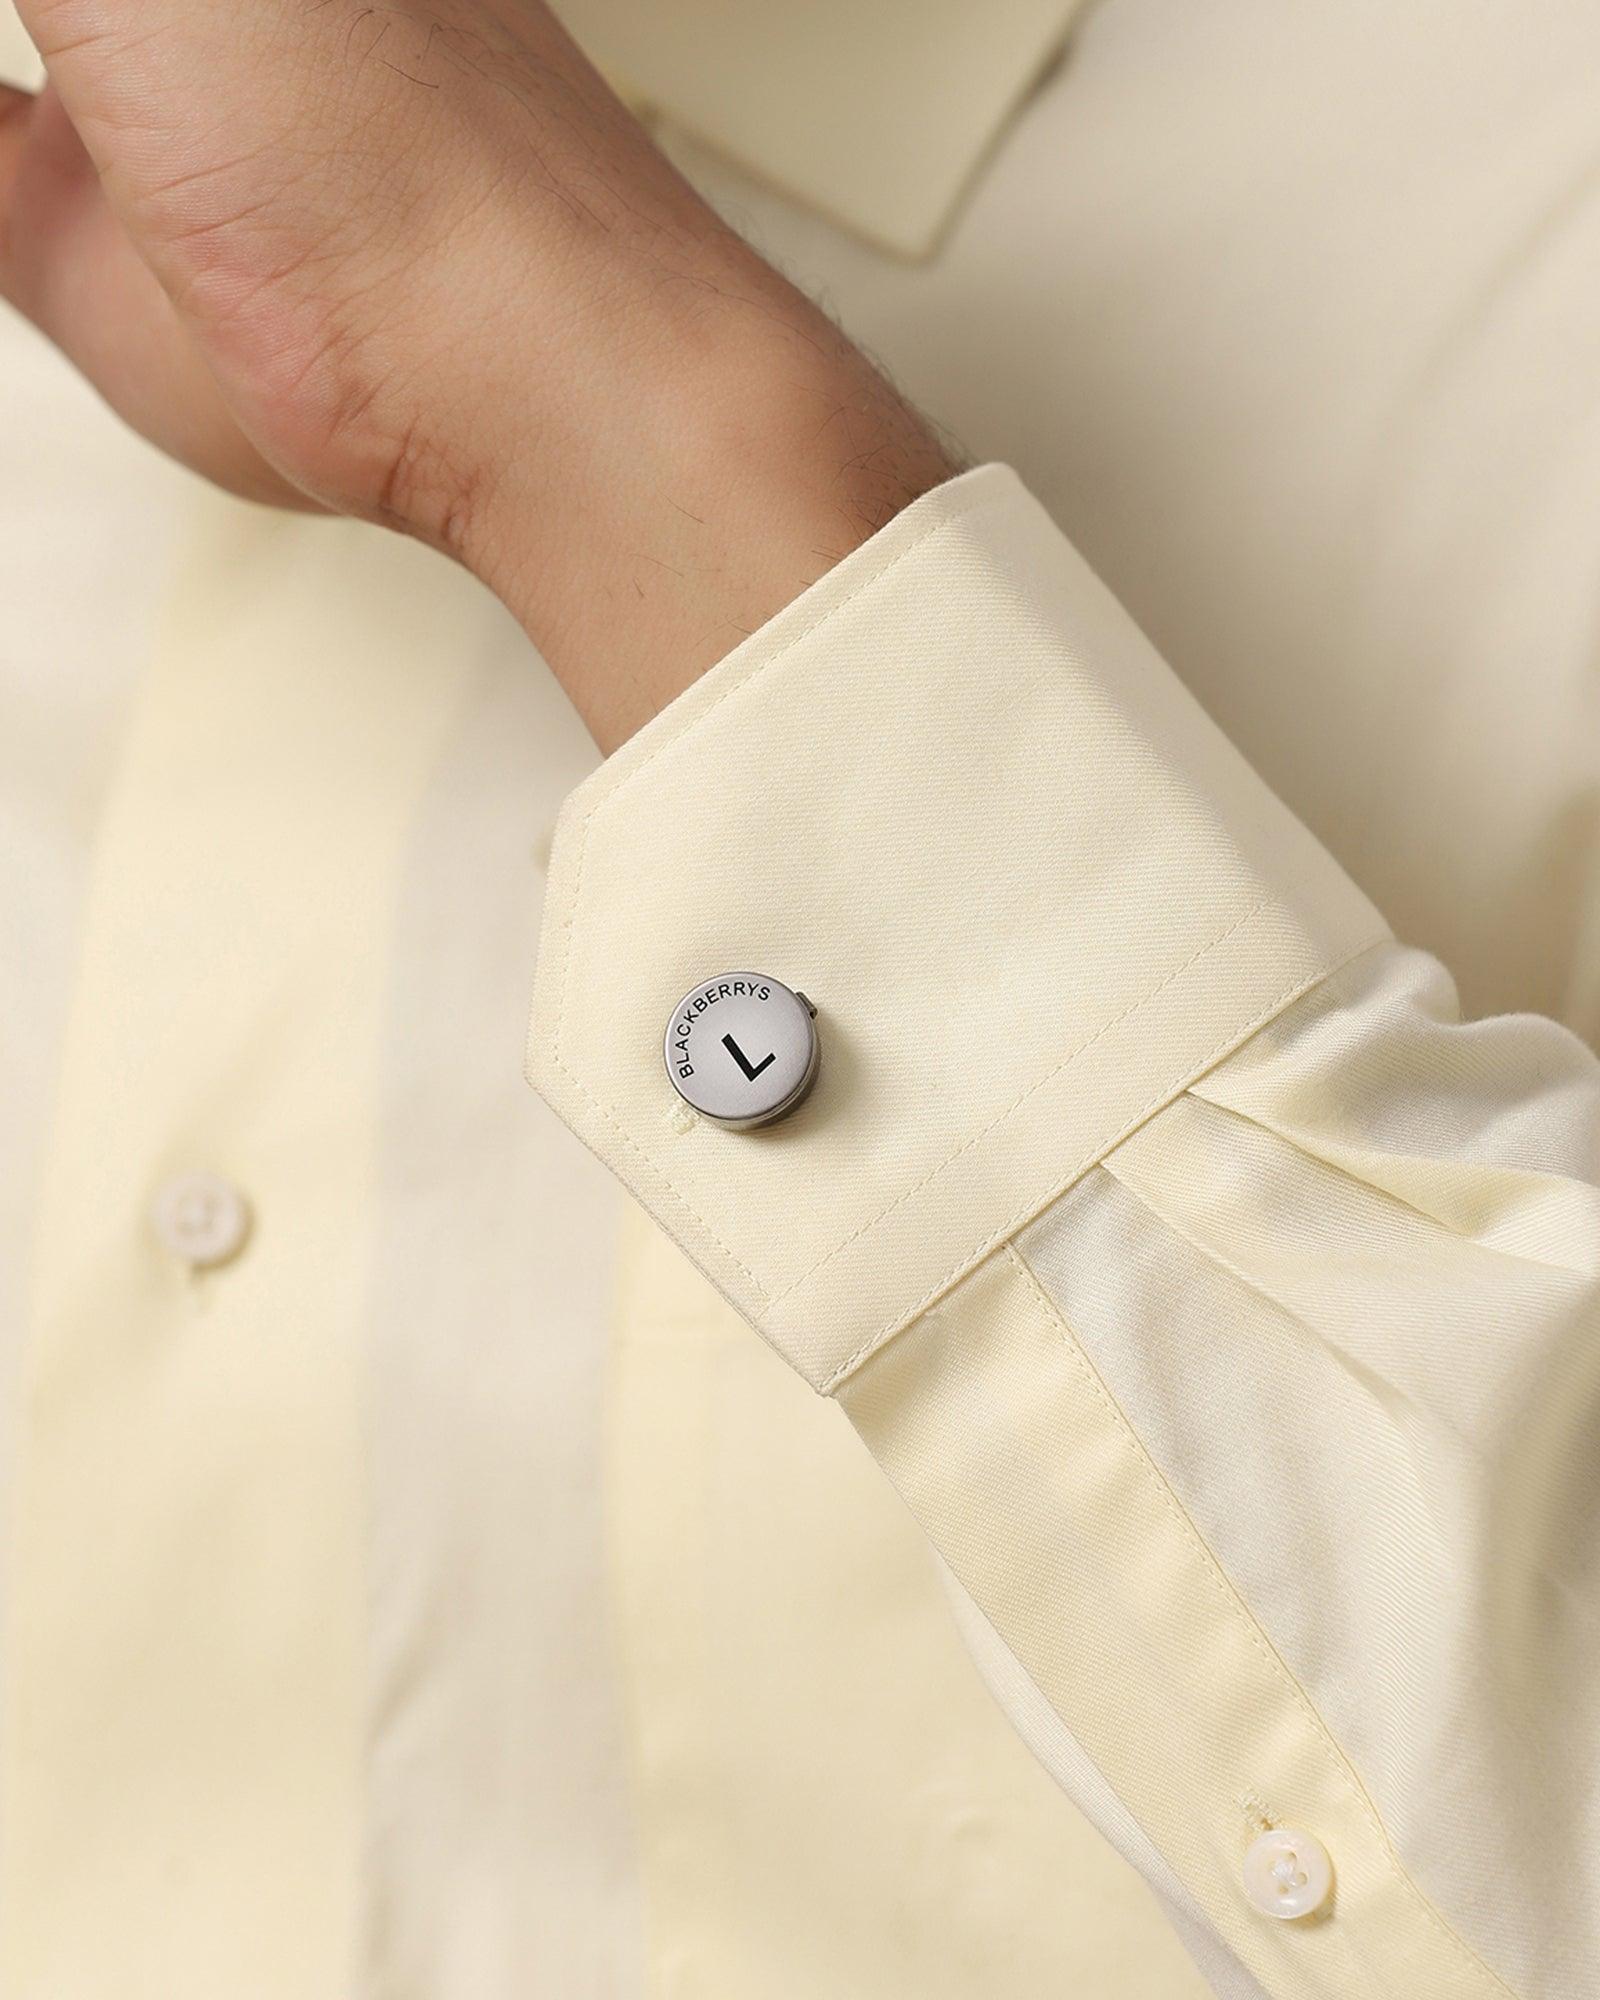 Personalised Shirt Button Cover With Alphabetic Initial-L